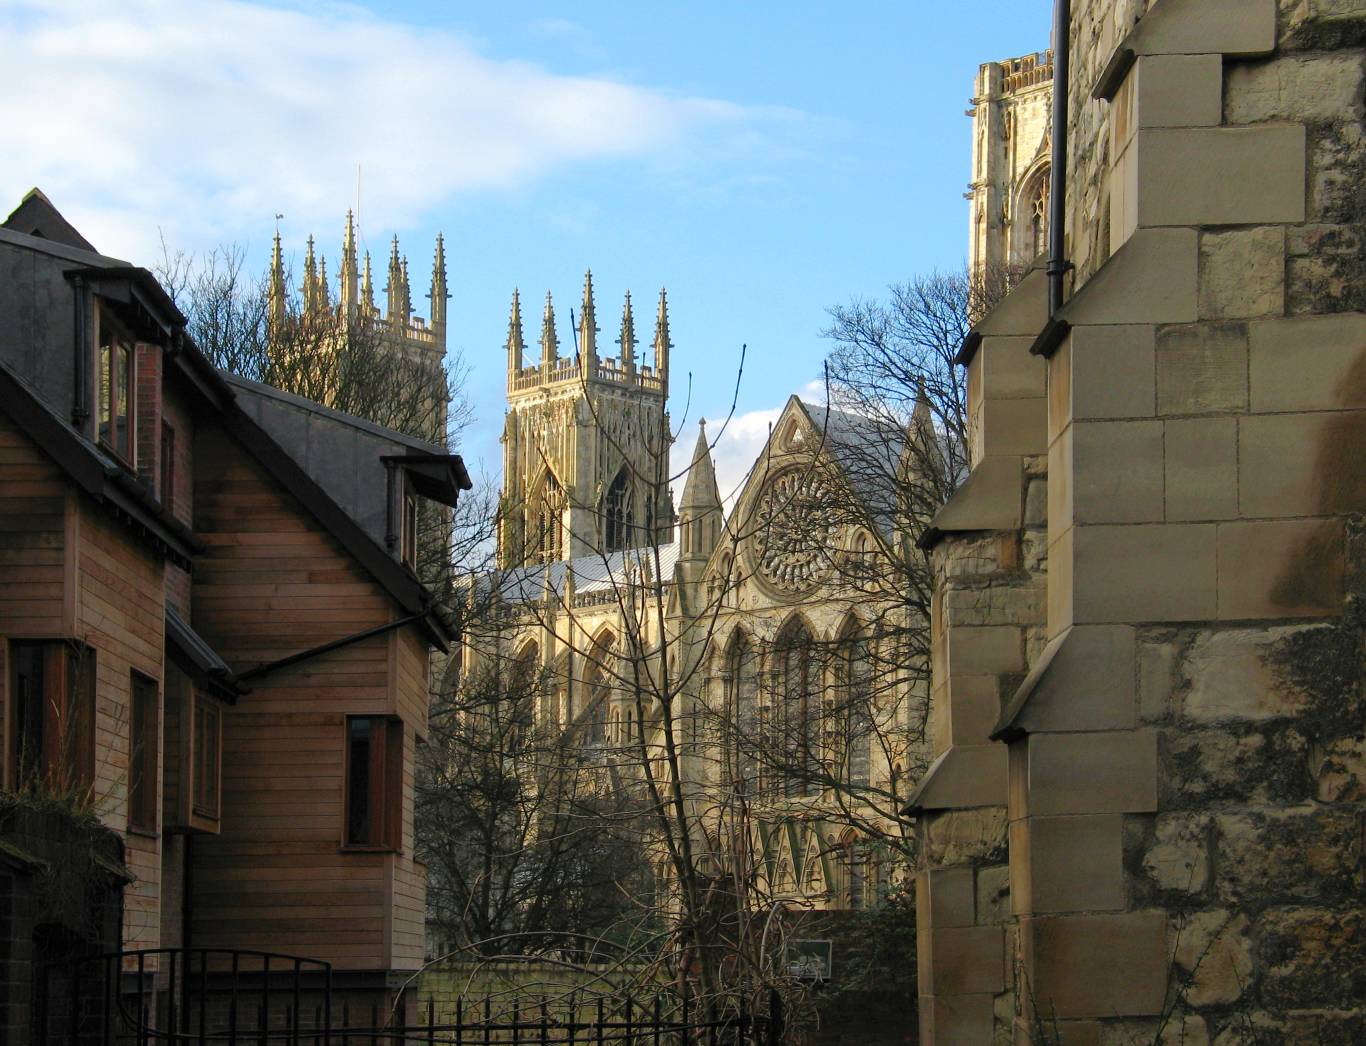 York old and new.jpg